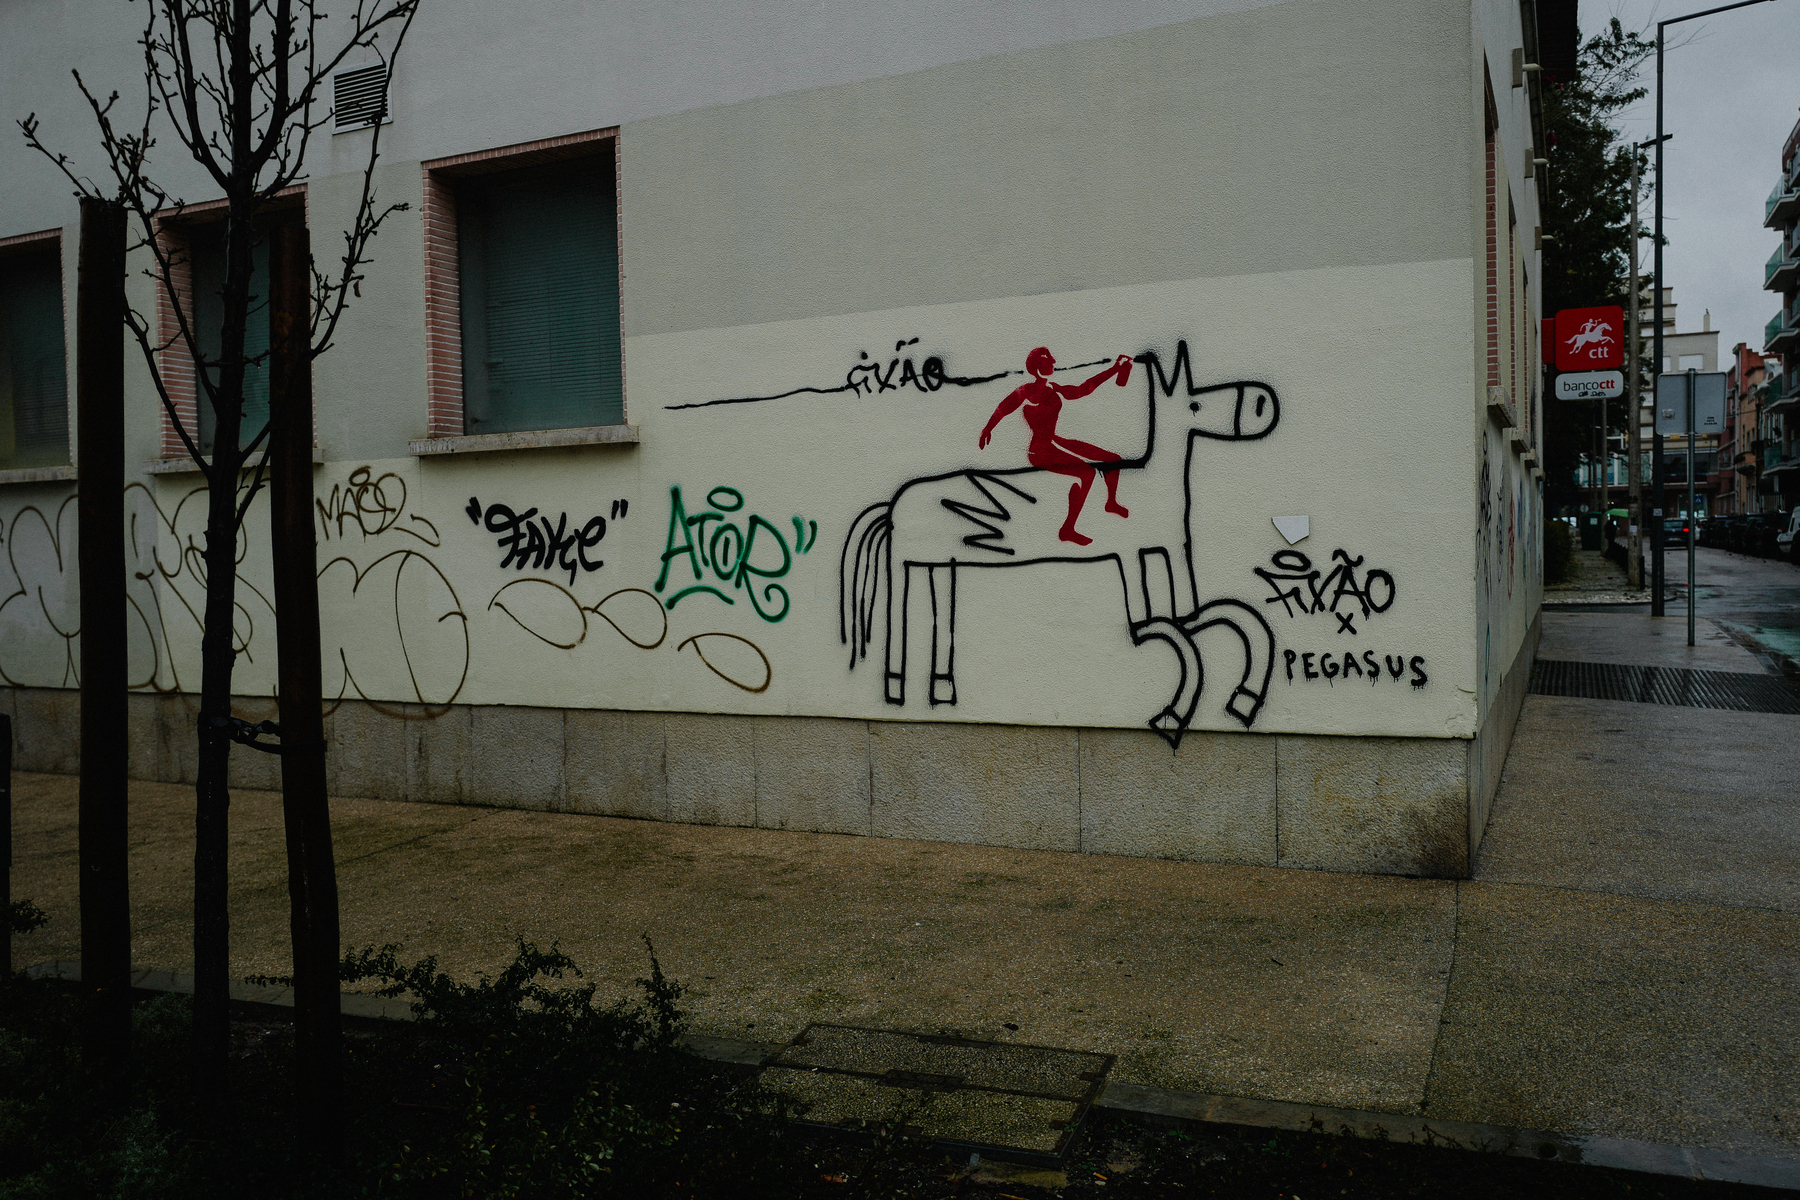 A street wall with graffiti depicting a stick figure human riding a simplistic horse, surrounded by various graffiti tags and writings. There&rsquo;s a bare tree in the foreground and a street scene with buildings in the background.